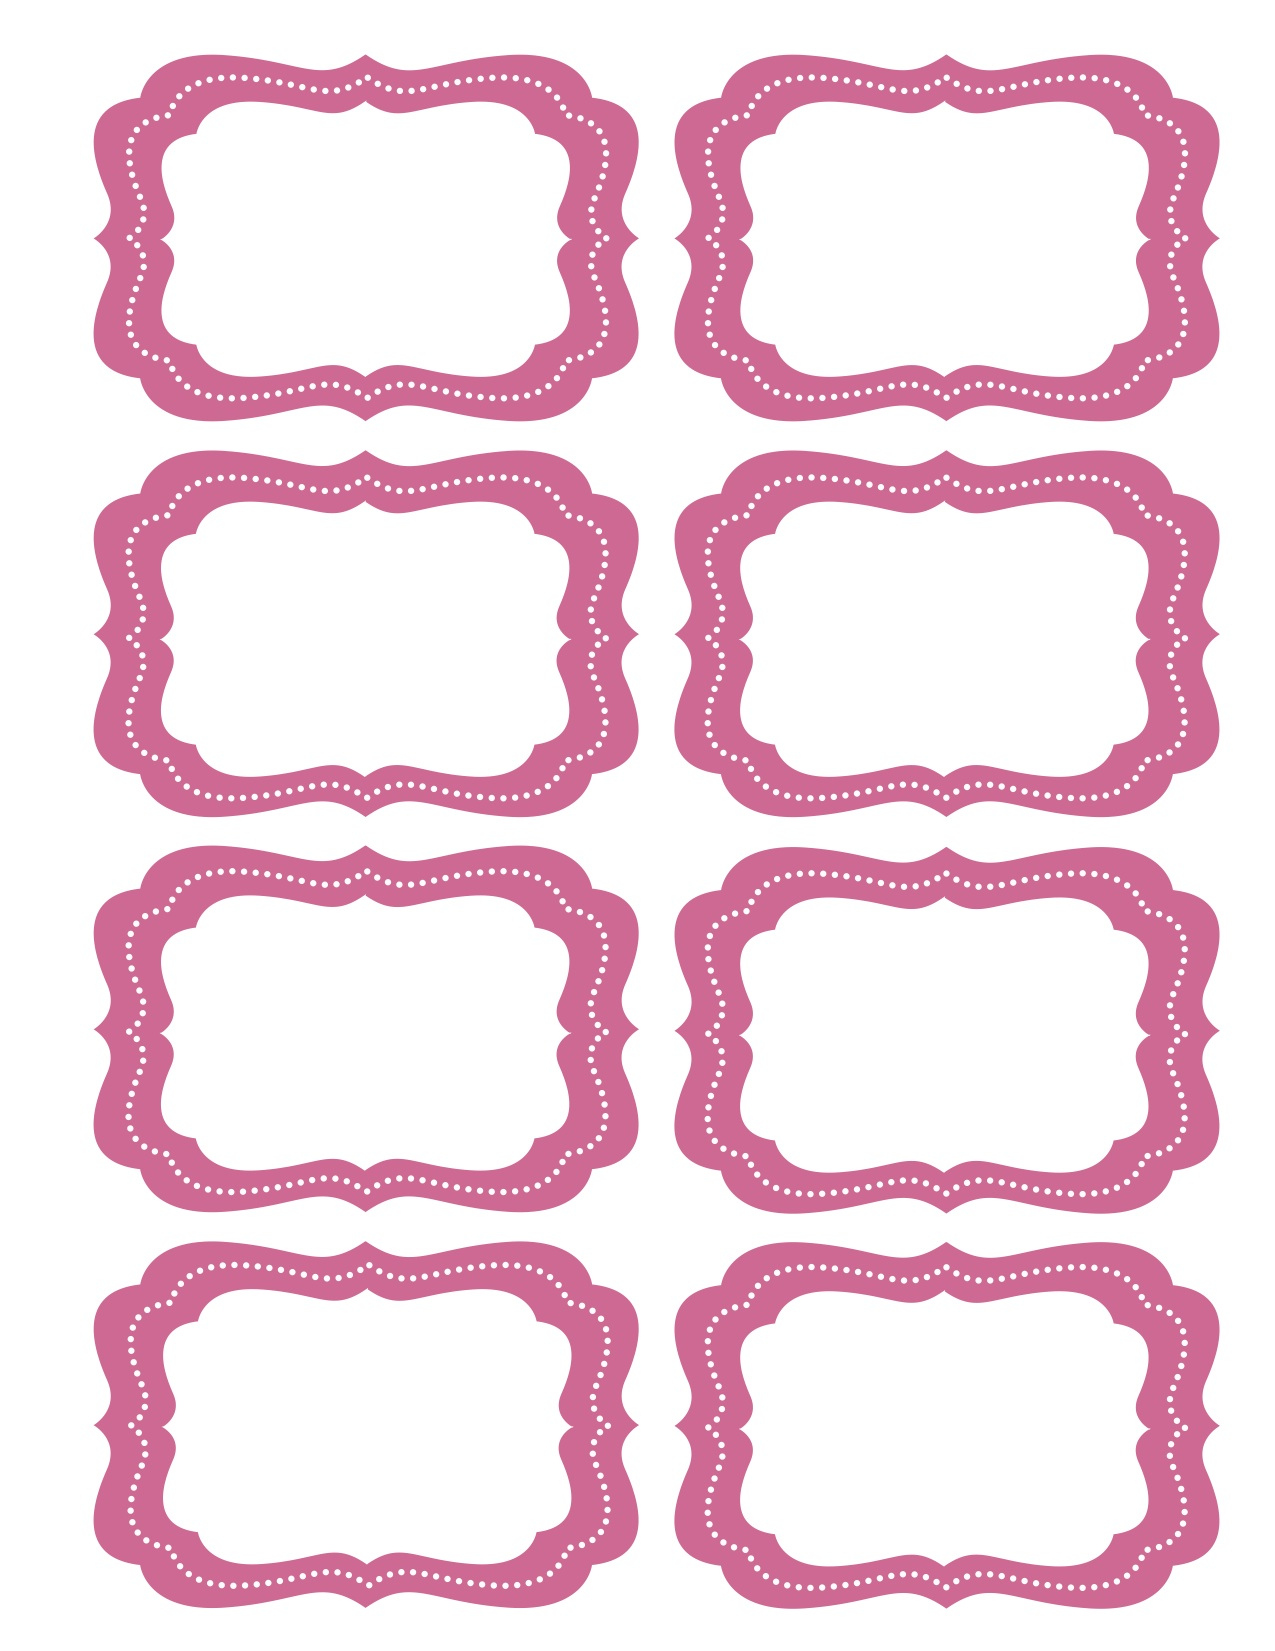 Candy Labels Blank Free Images At Clker Vector Clip Art Online 